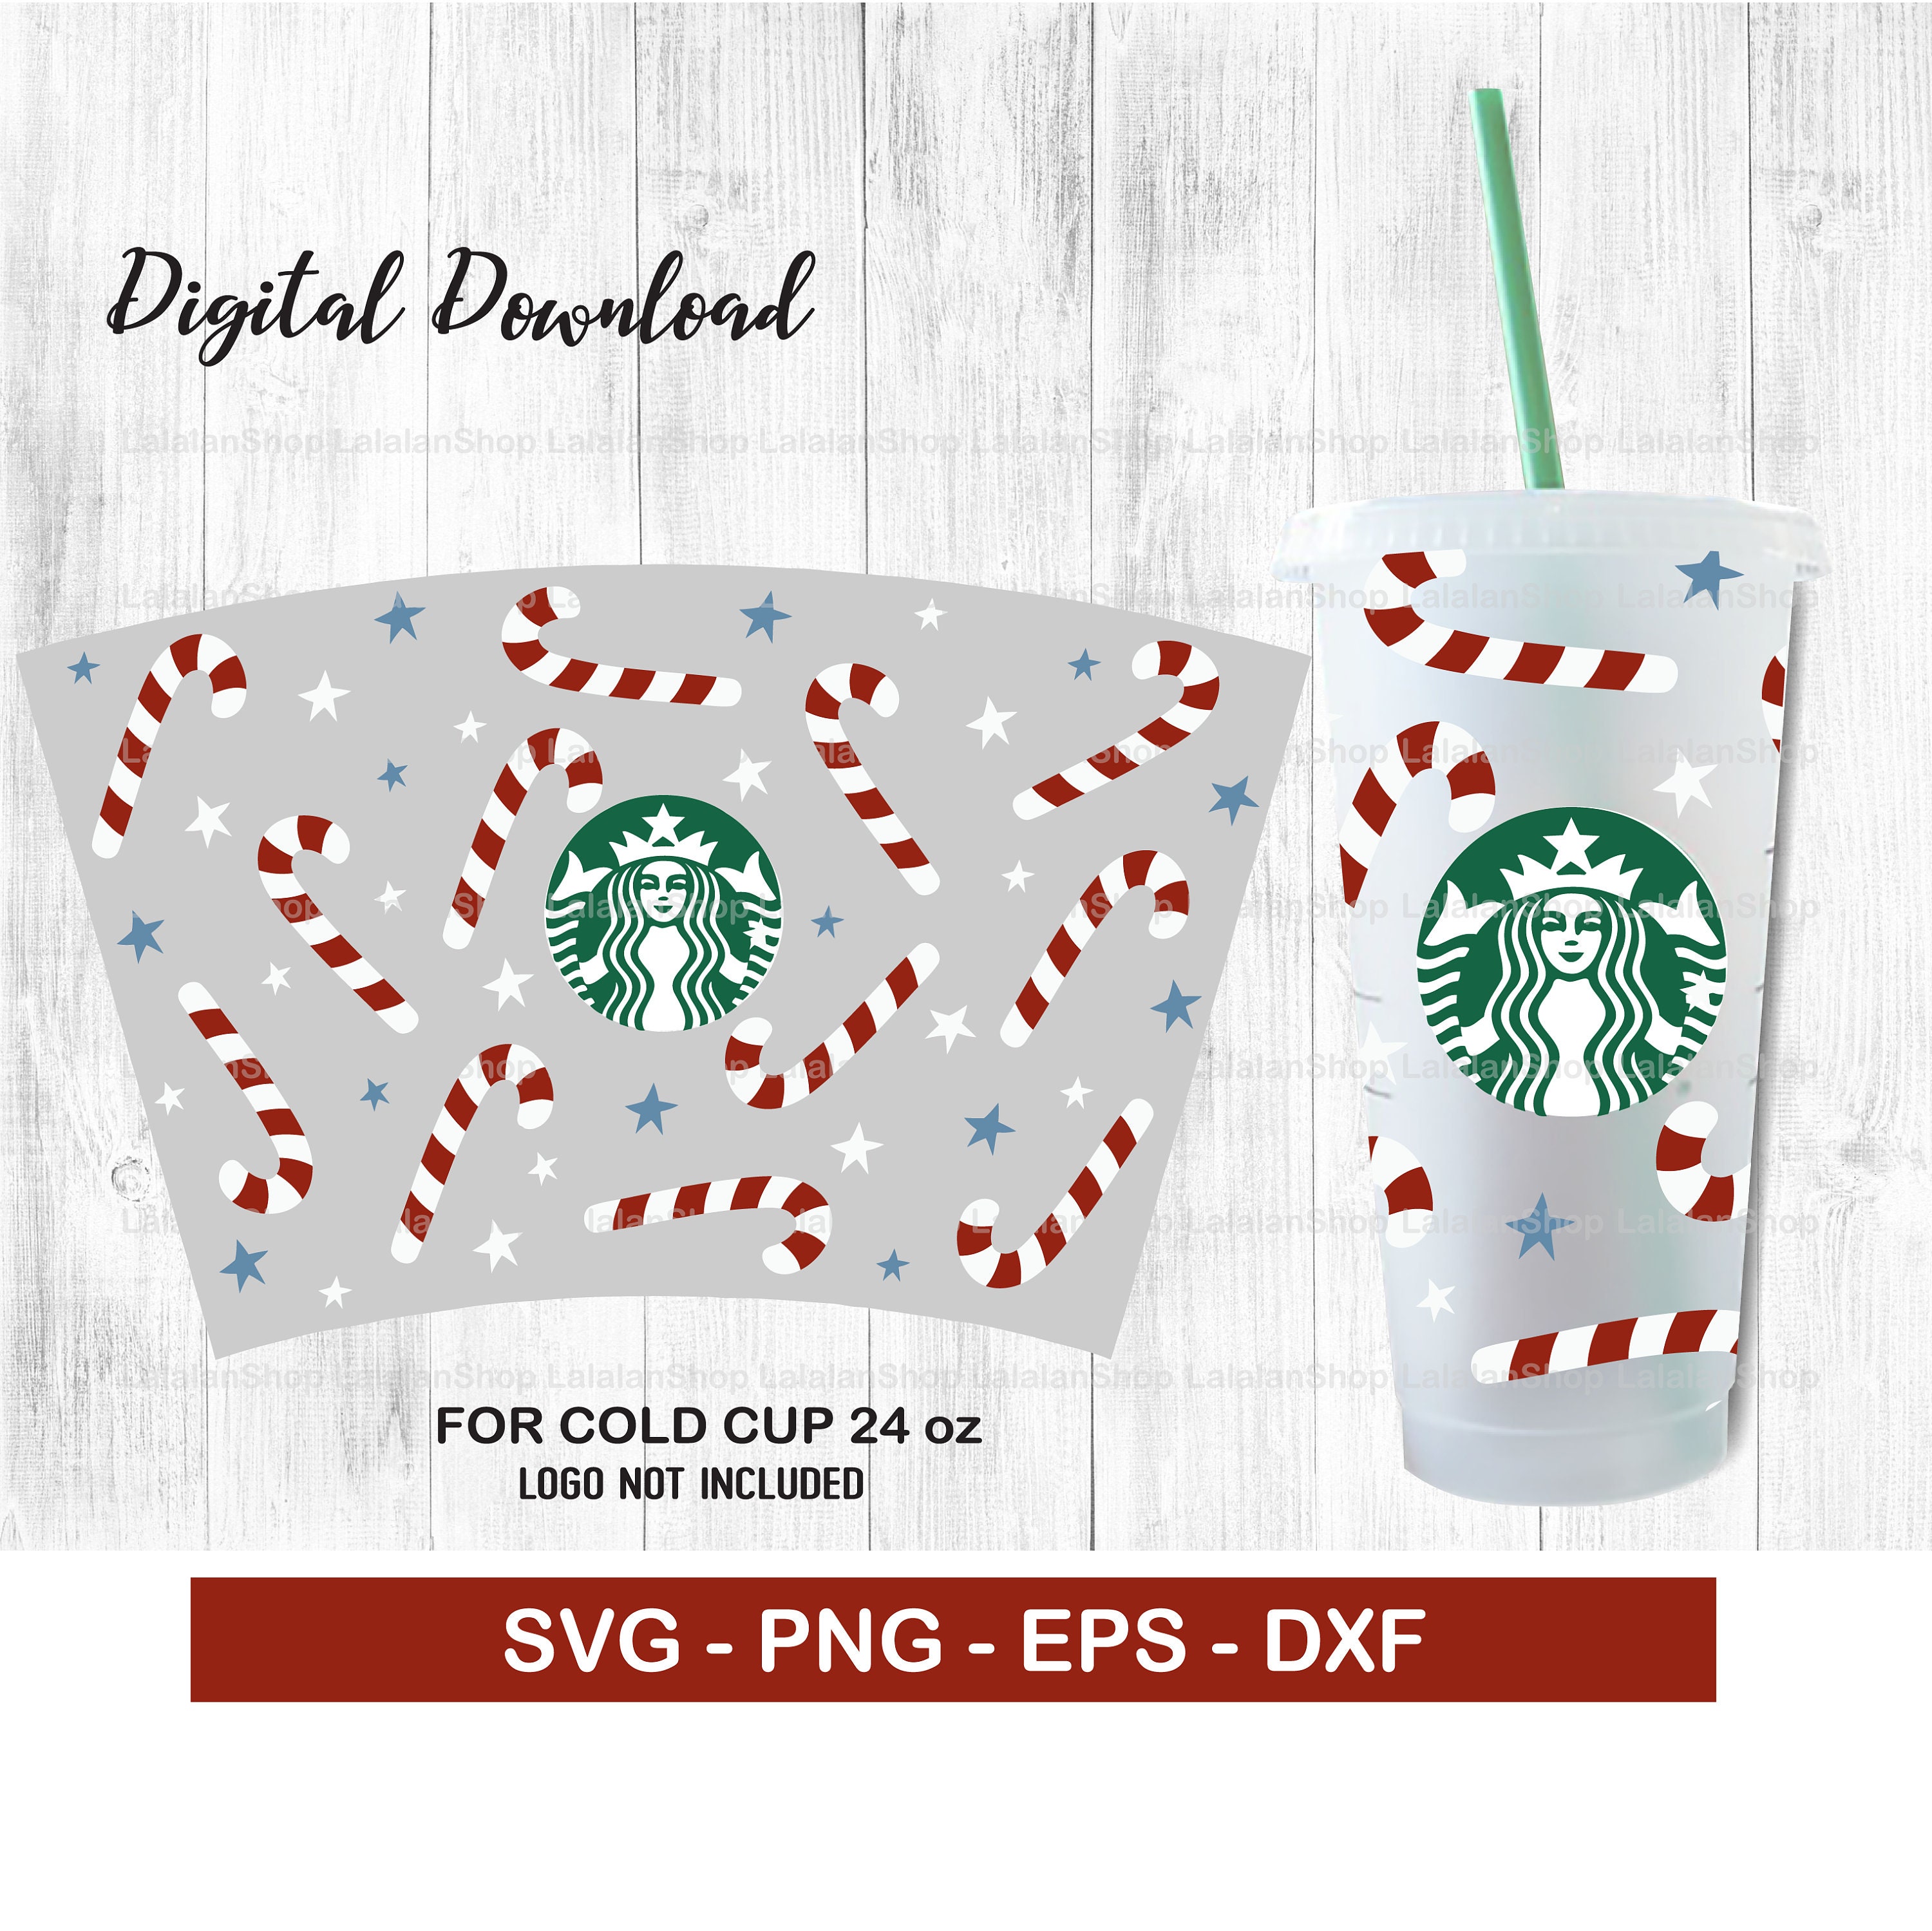 Candy Cane Starbucks Stocking Christmas Reusable Cold Cup with lid & Straw  or Hot Cup Holiday Tumbler Christmas Thanksgiving HalloweenFall